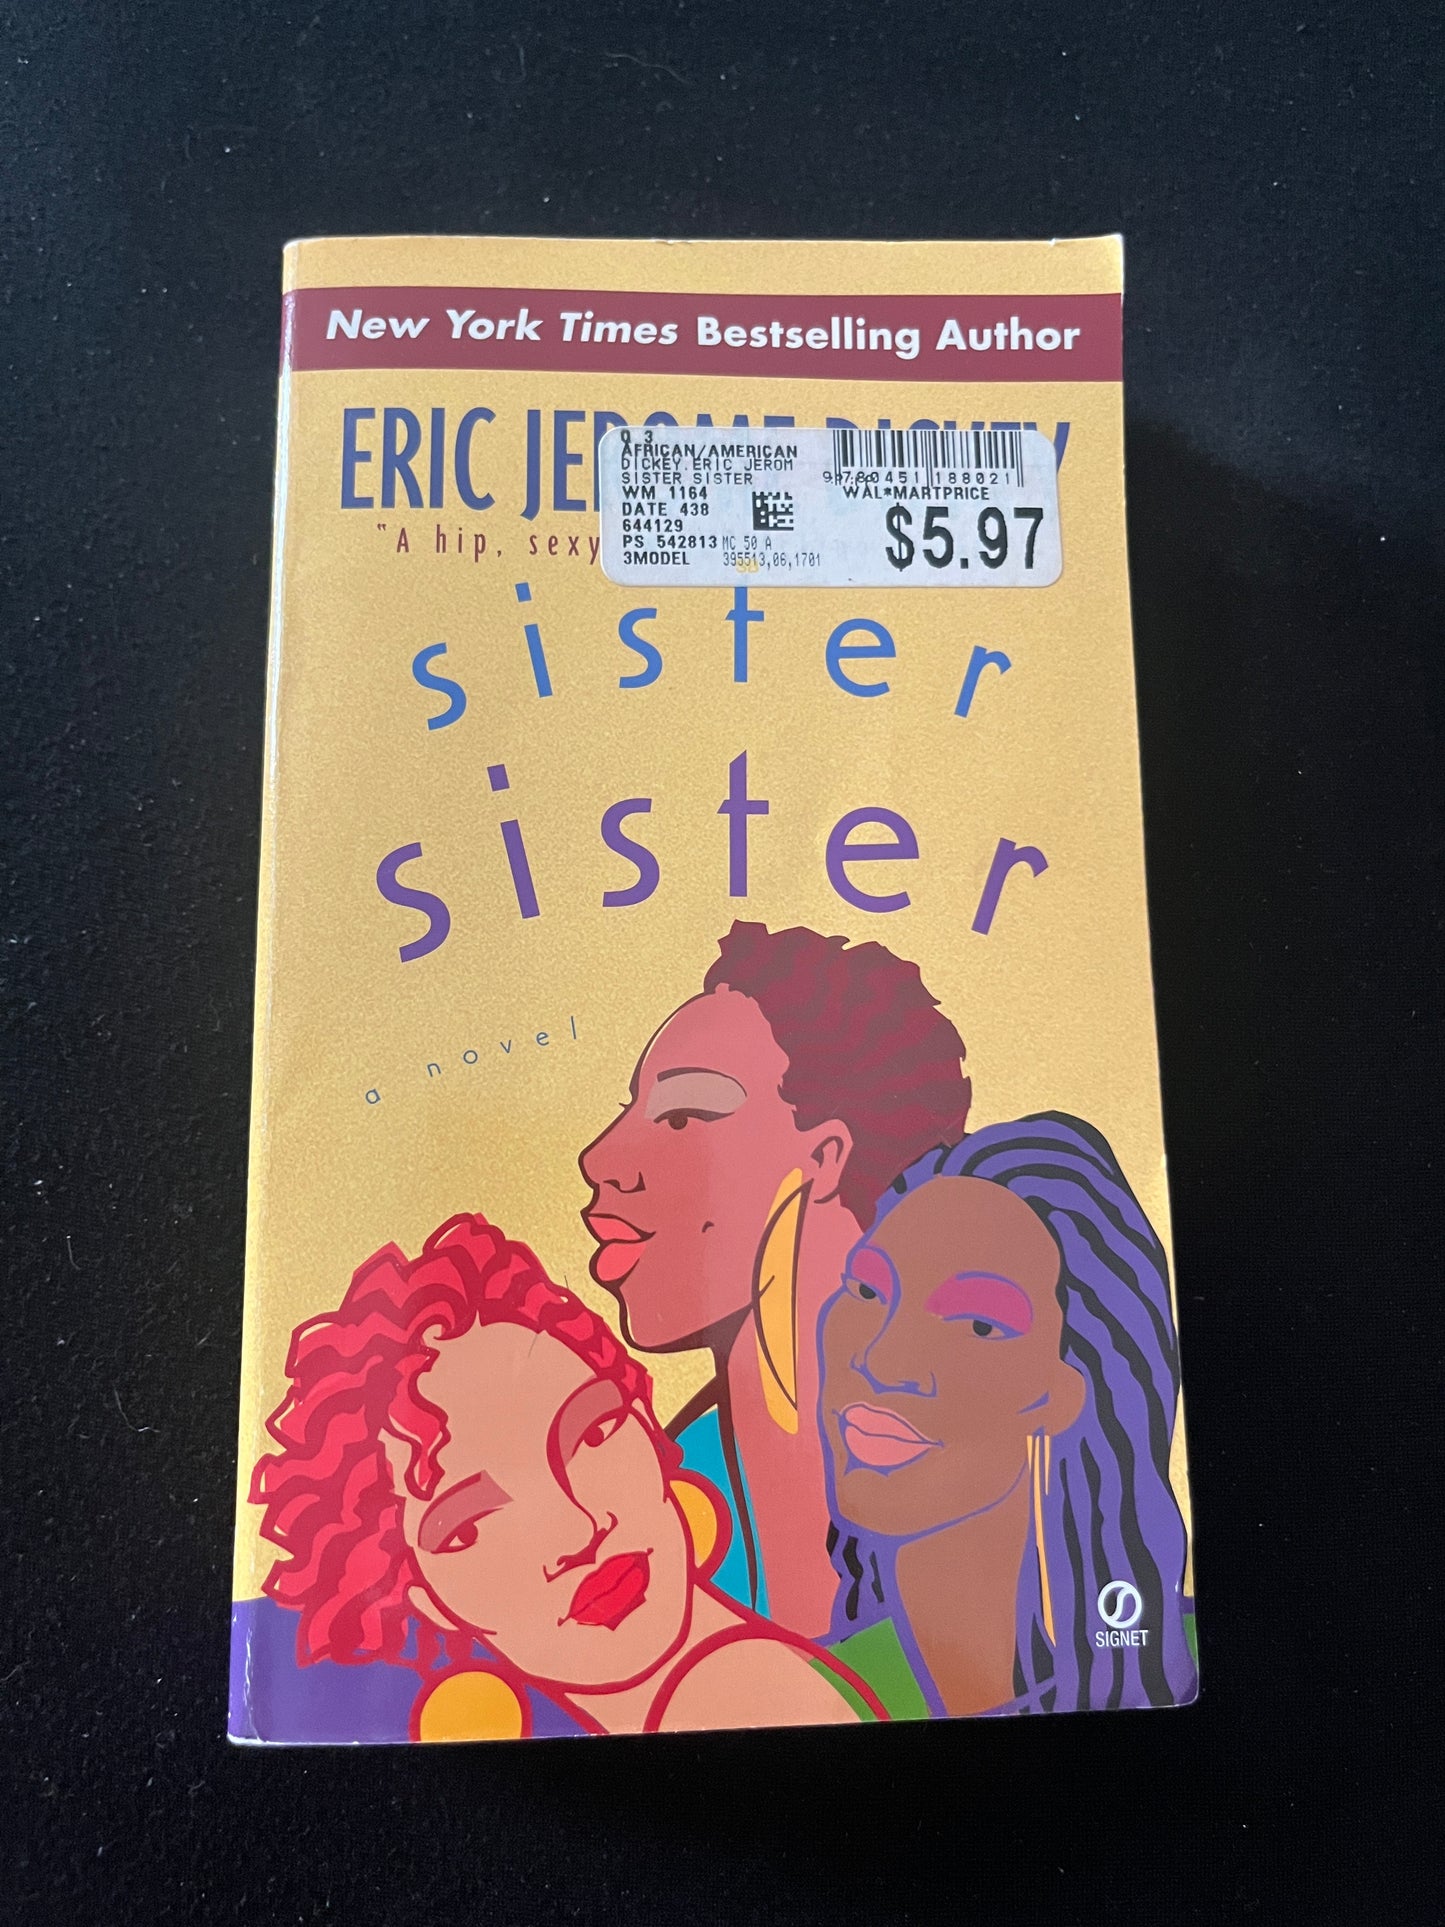 SISTER SISTER by Eric Jerome Dickey